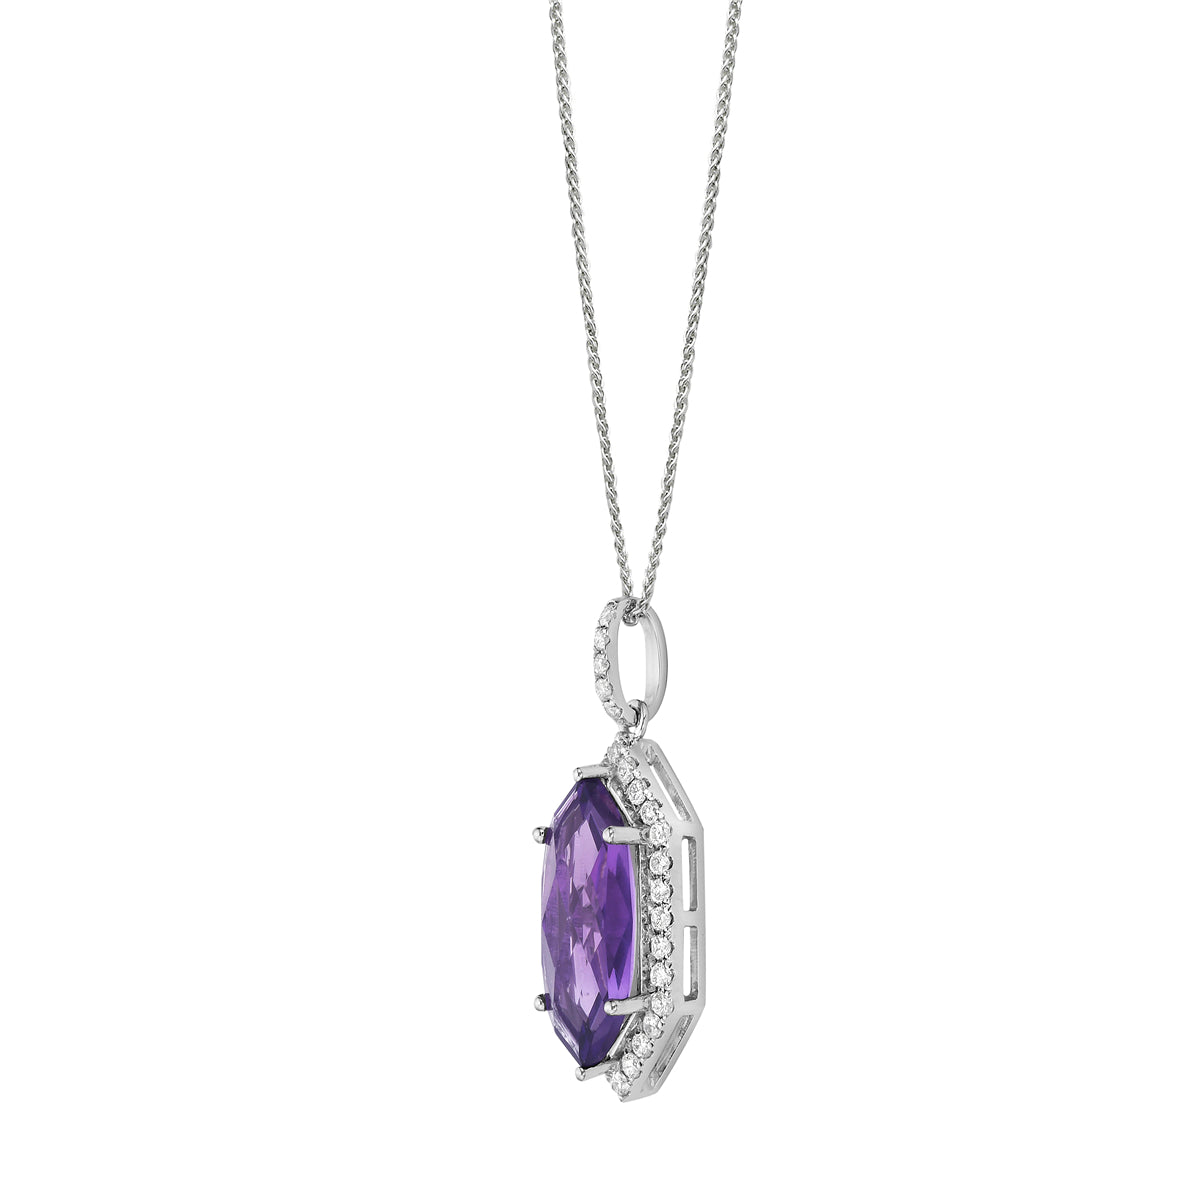 Pendant 14KW/1.3G 1AME-2.43CT 33RD-0.31CT Amthyst